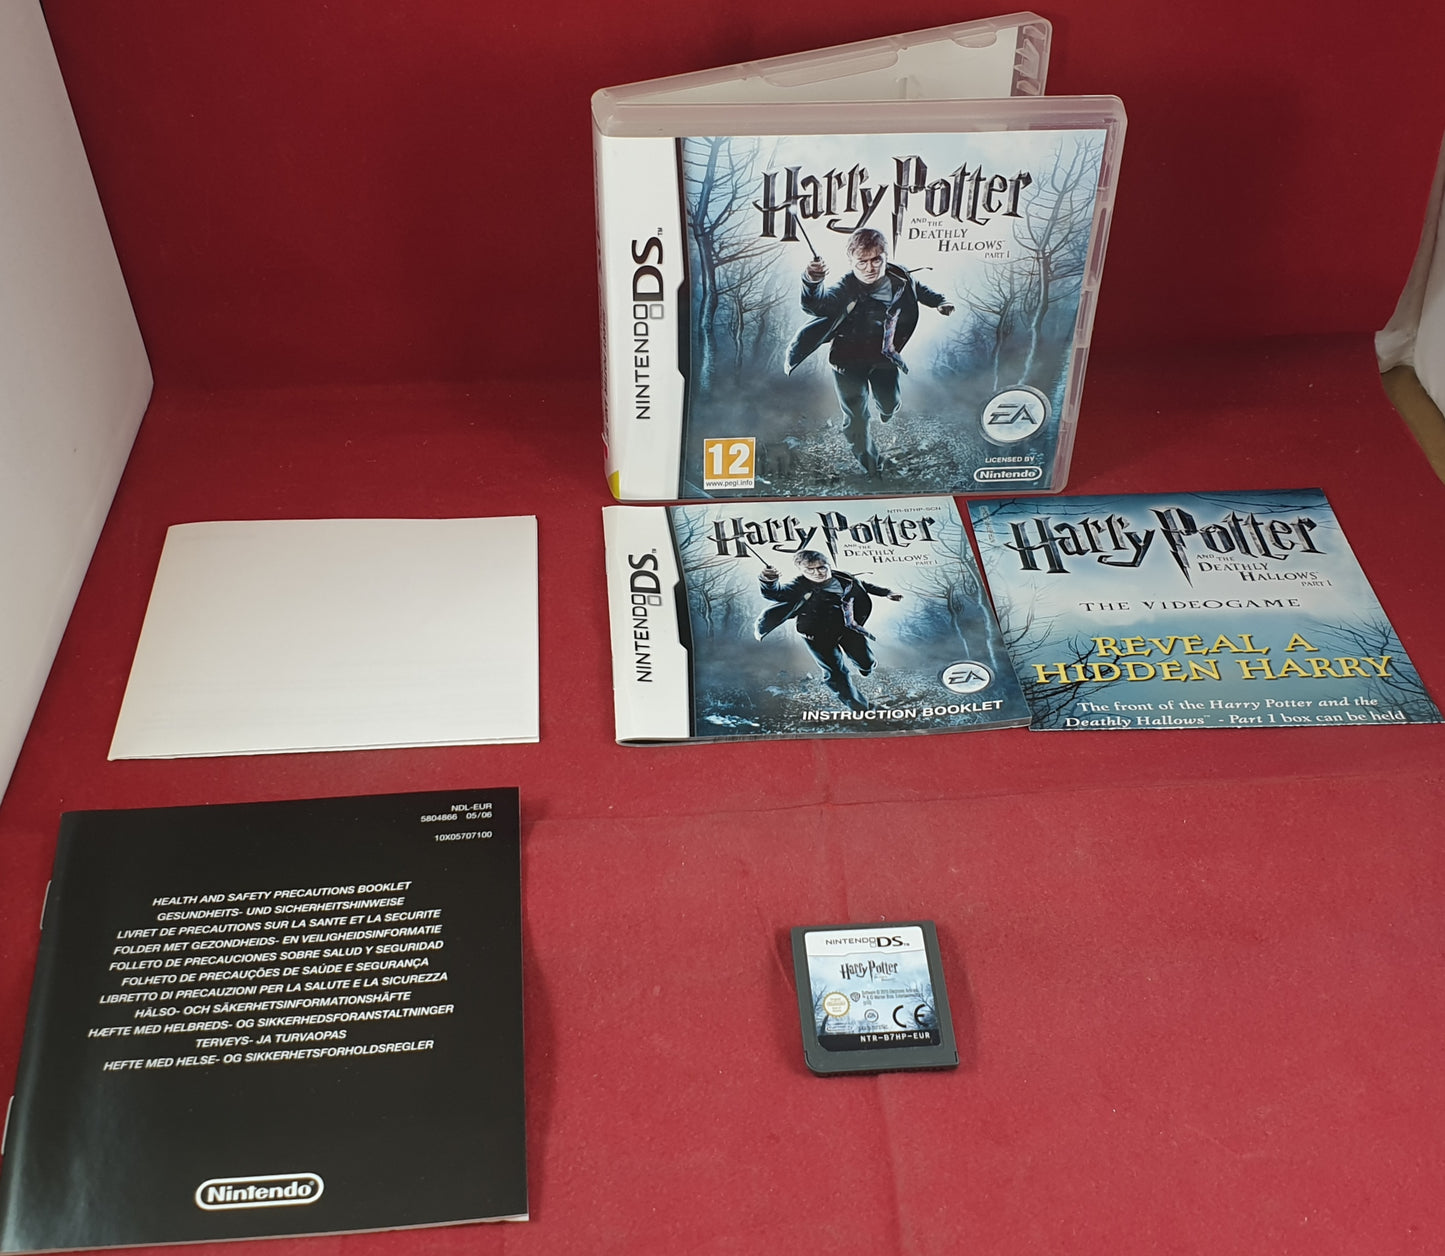 Harry Potter and the Deathly Hallows Part 1 Nintendo DS Game